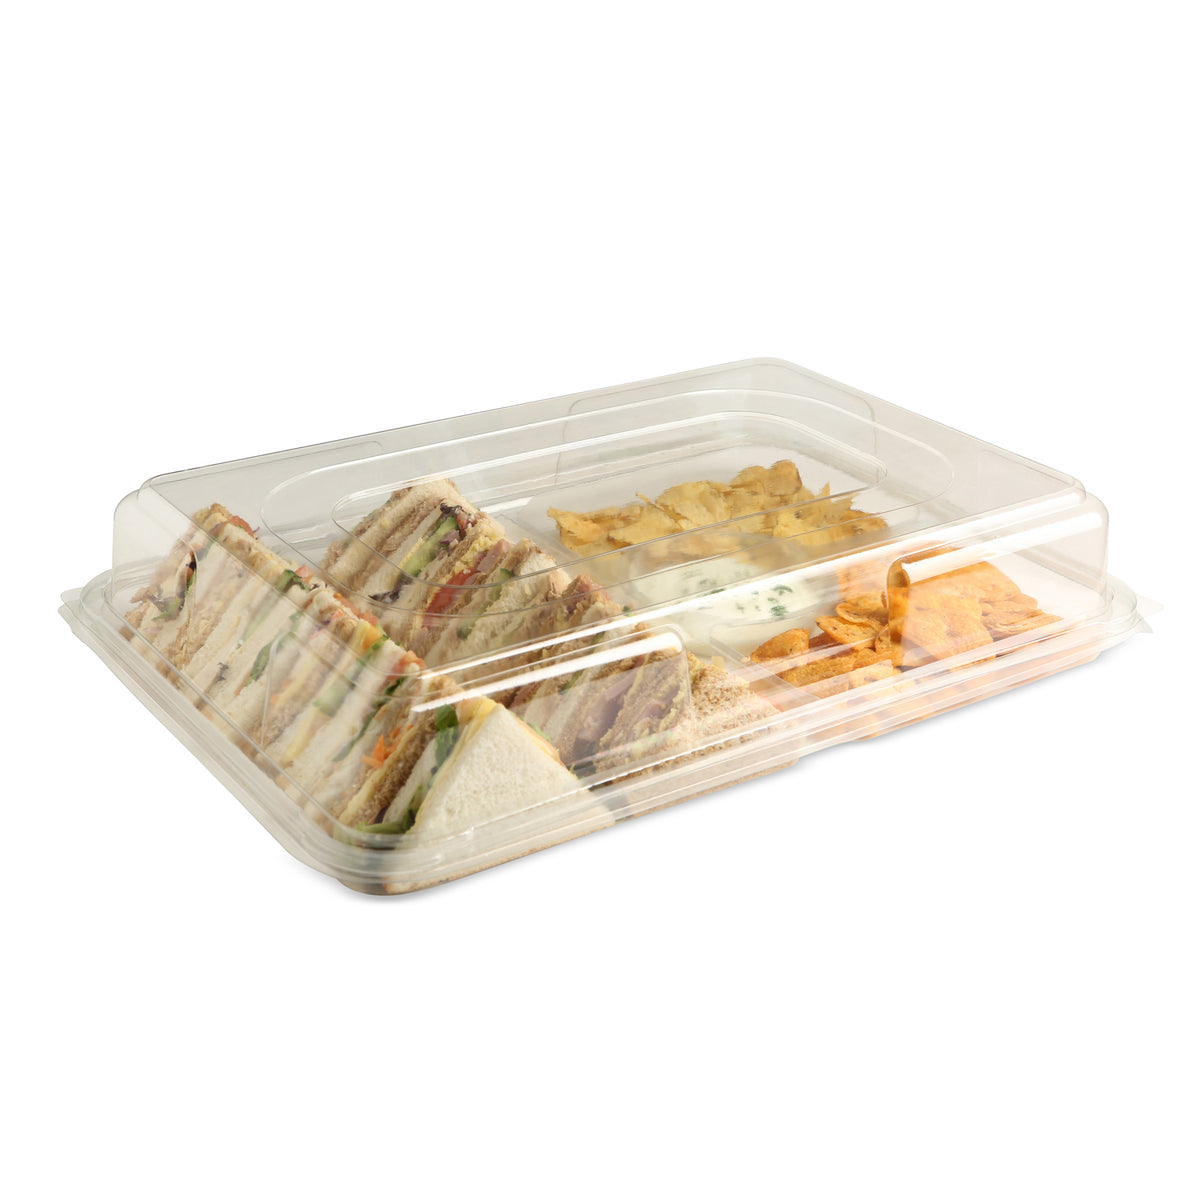 5 x Large ‘Glass Effect’ Dips Trays with lids for Party Food and Dips (450mm x 310mm) - Caterline -